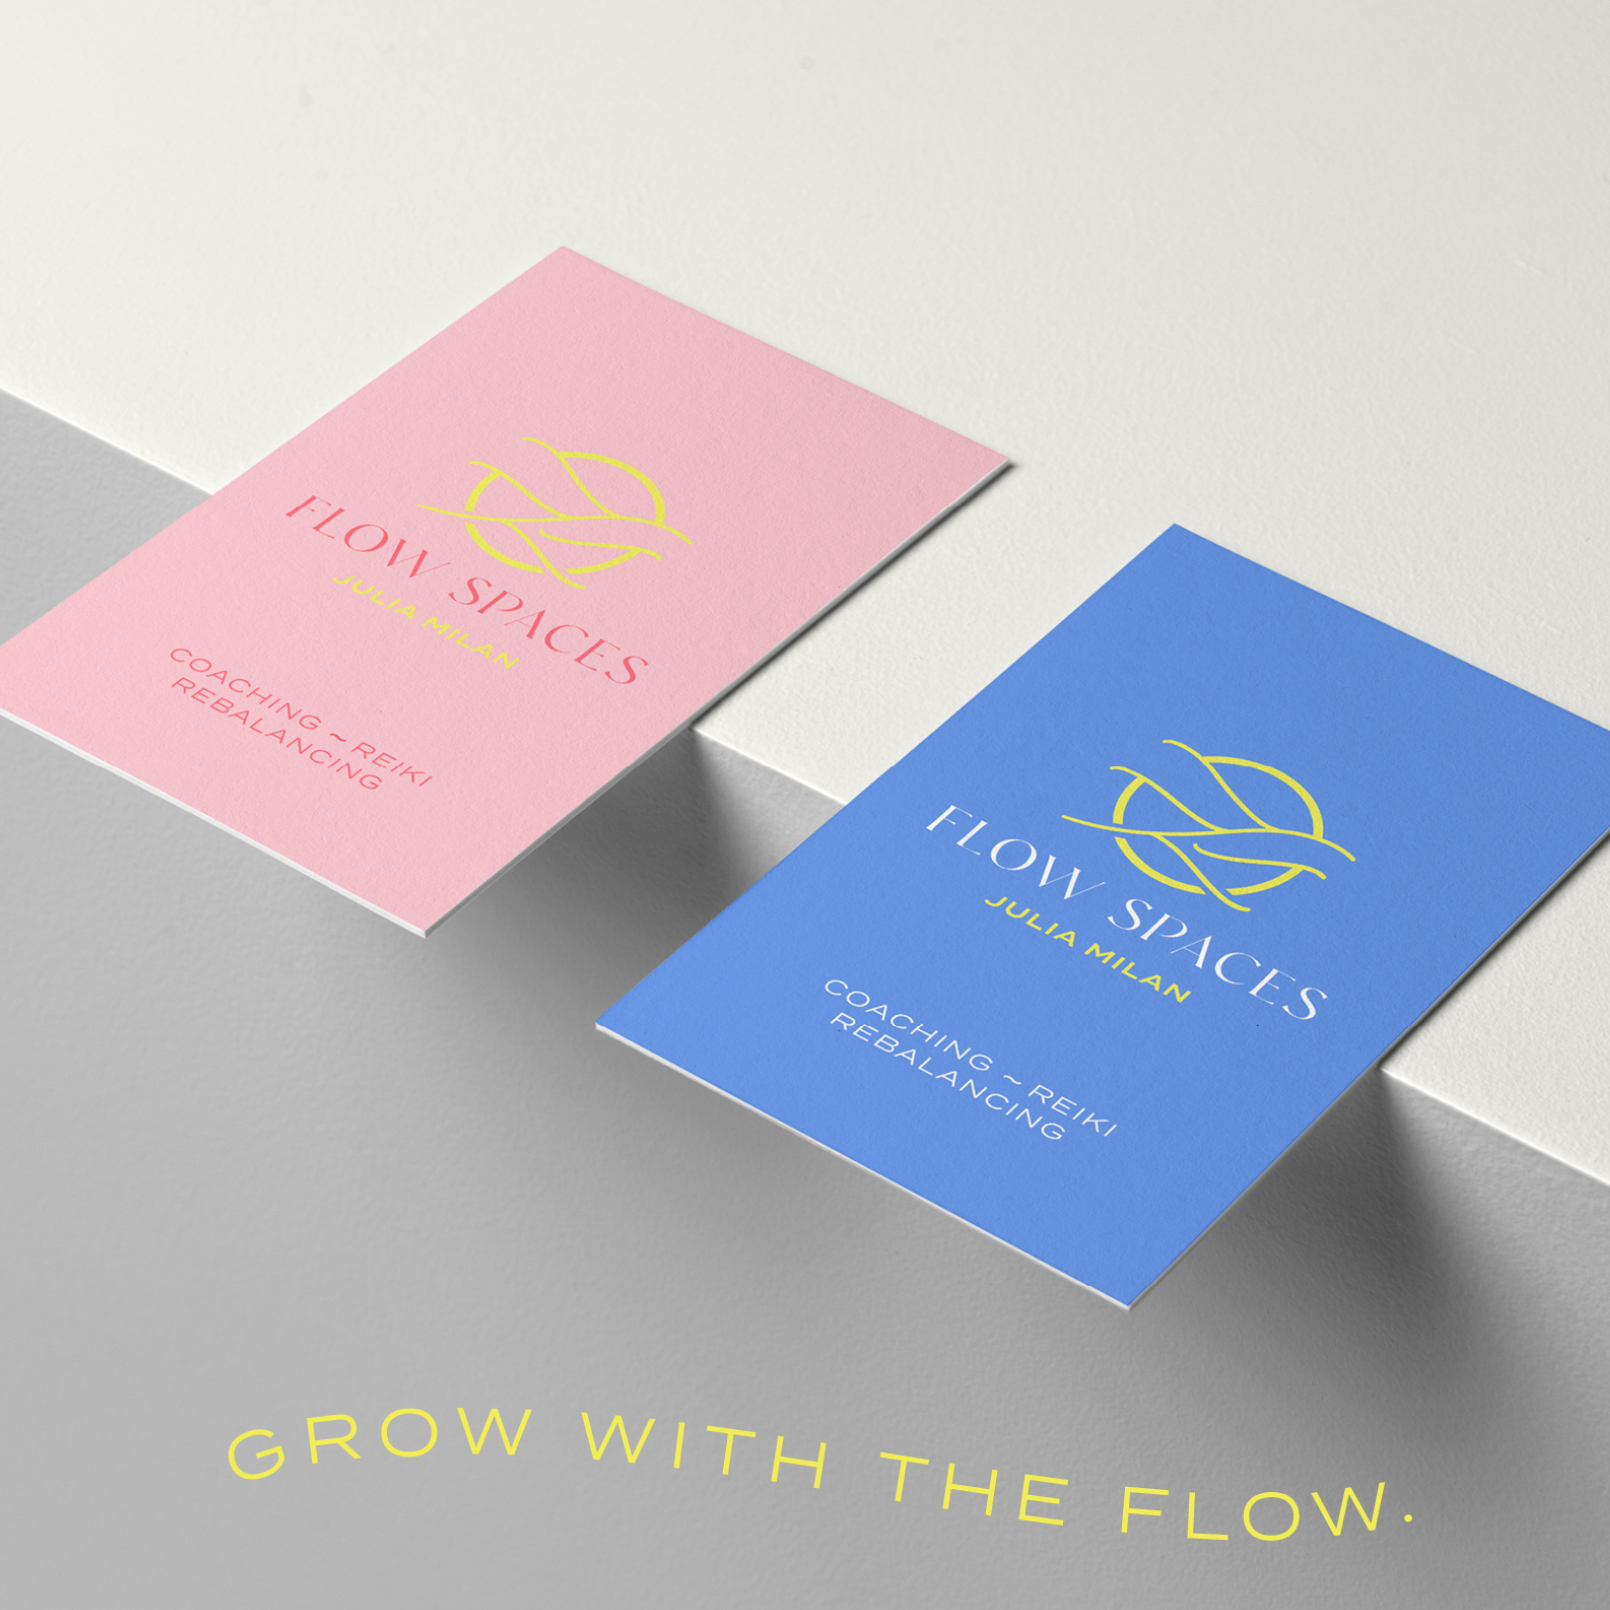 Crafting Brand Harmony: Flow Spaces Design for Julia Milan’s Coaching Brand